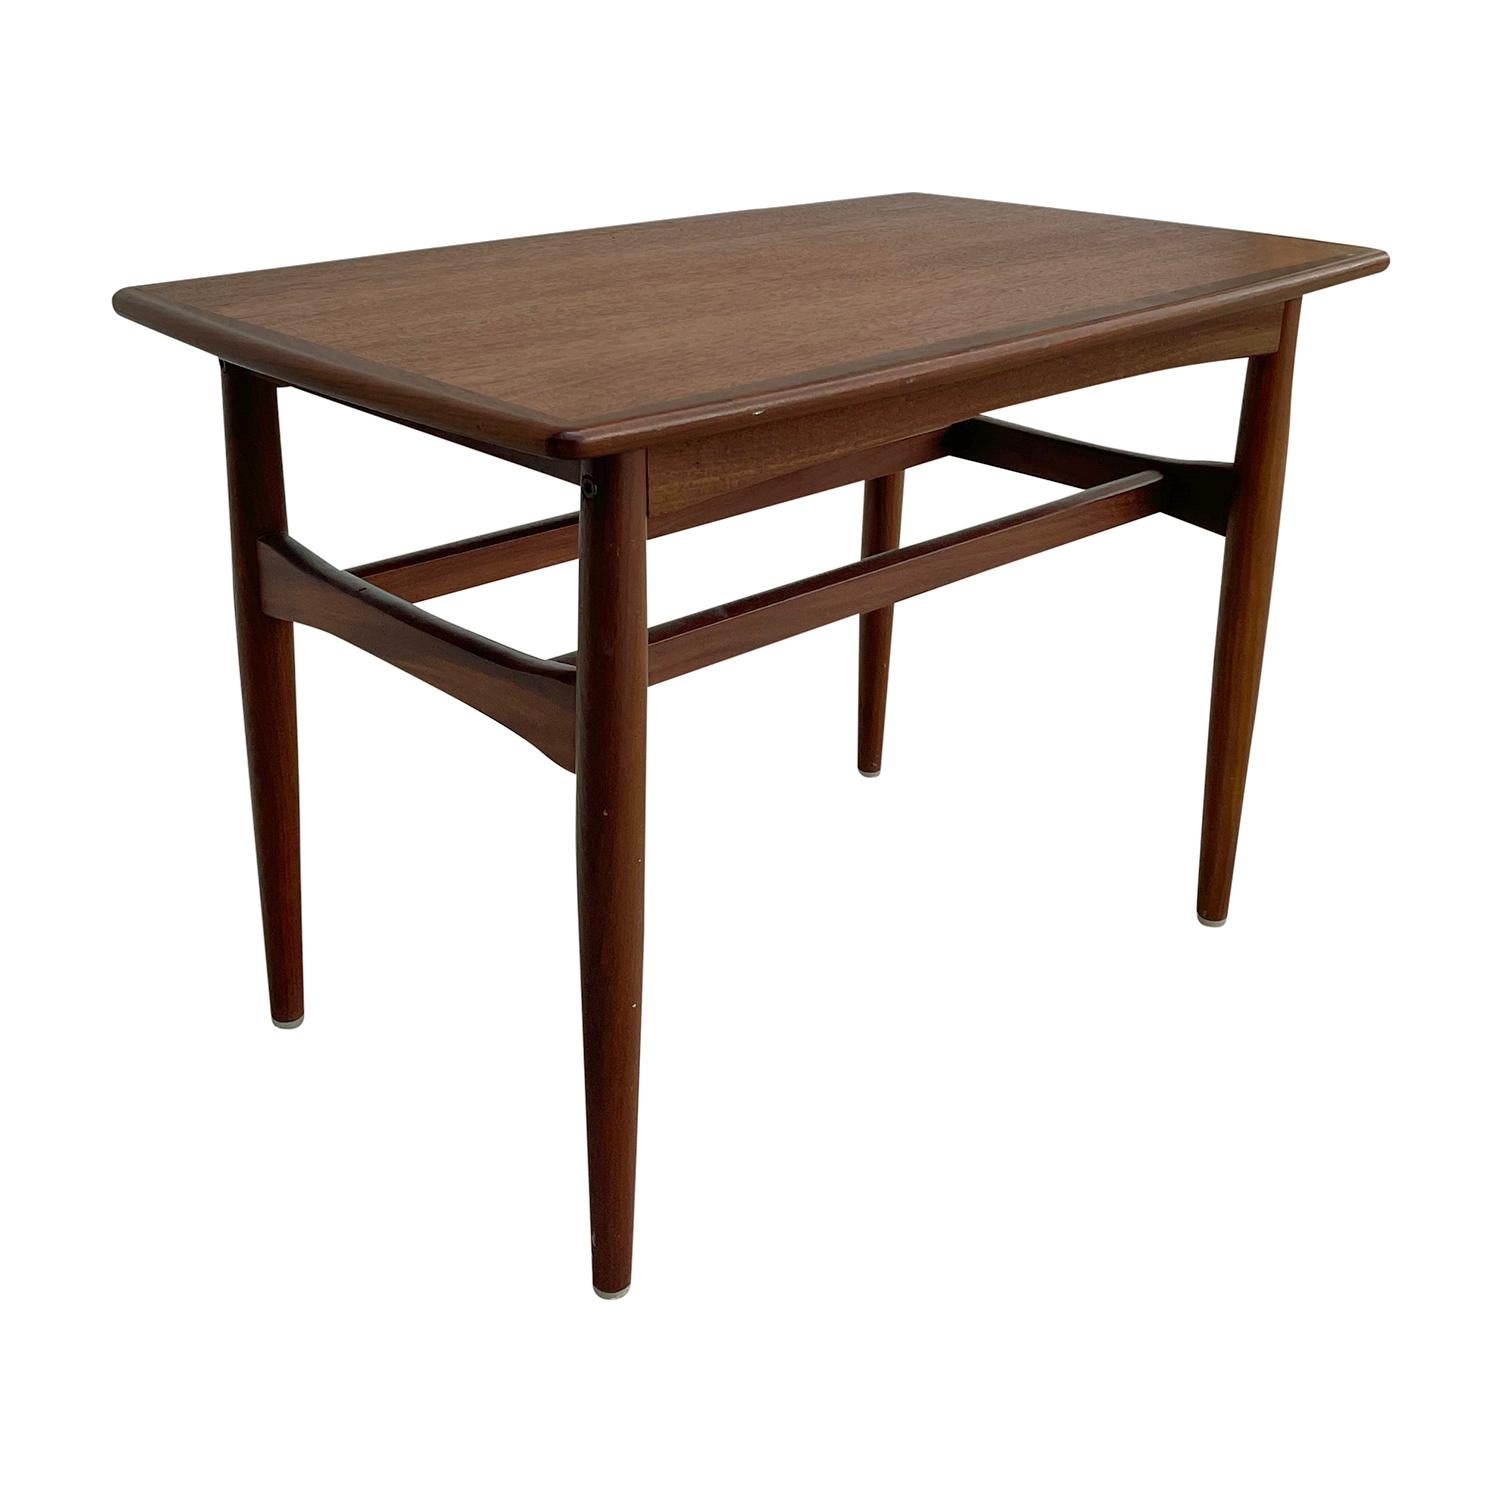 20th Century Danish Vintage Sofa Table - Scandinavian Teakwood Side Table In Good Condition For Sale In West Palm Beach, FL